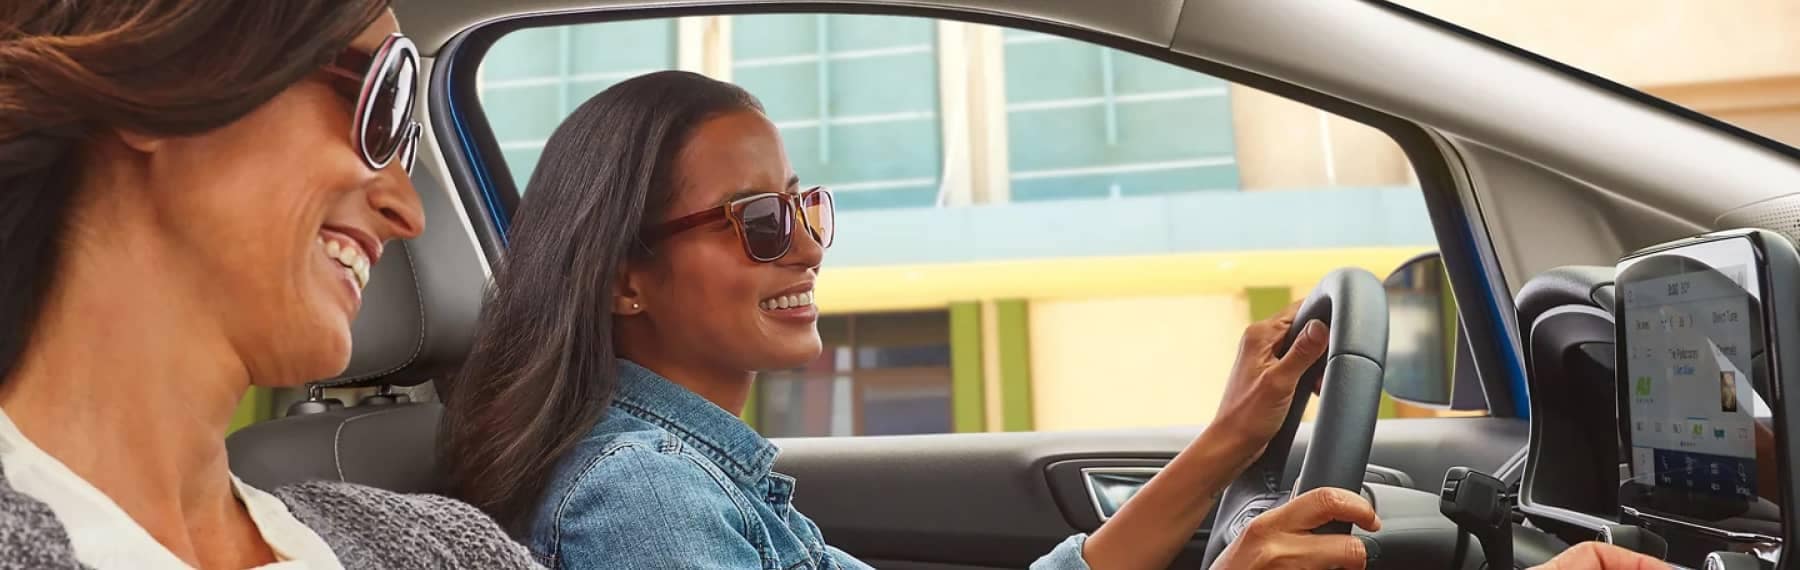 Girl wearing sunglasses Driving and Smiling with older woman in Passenger